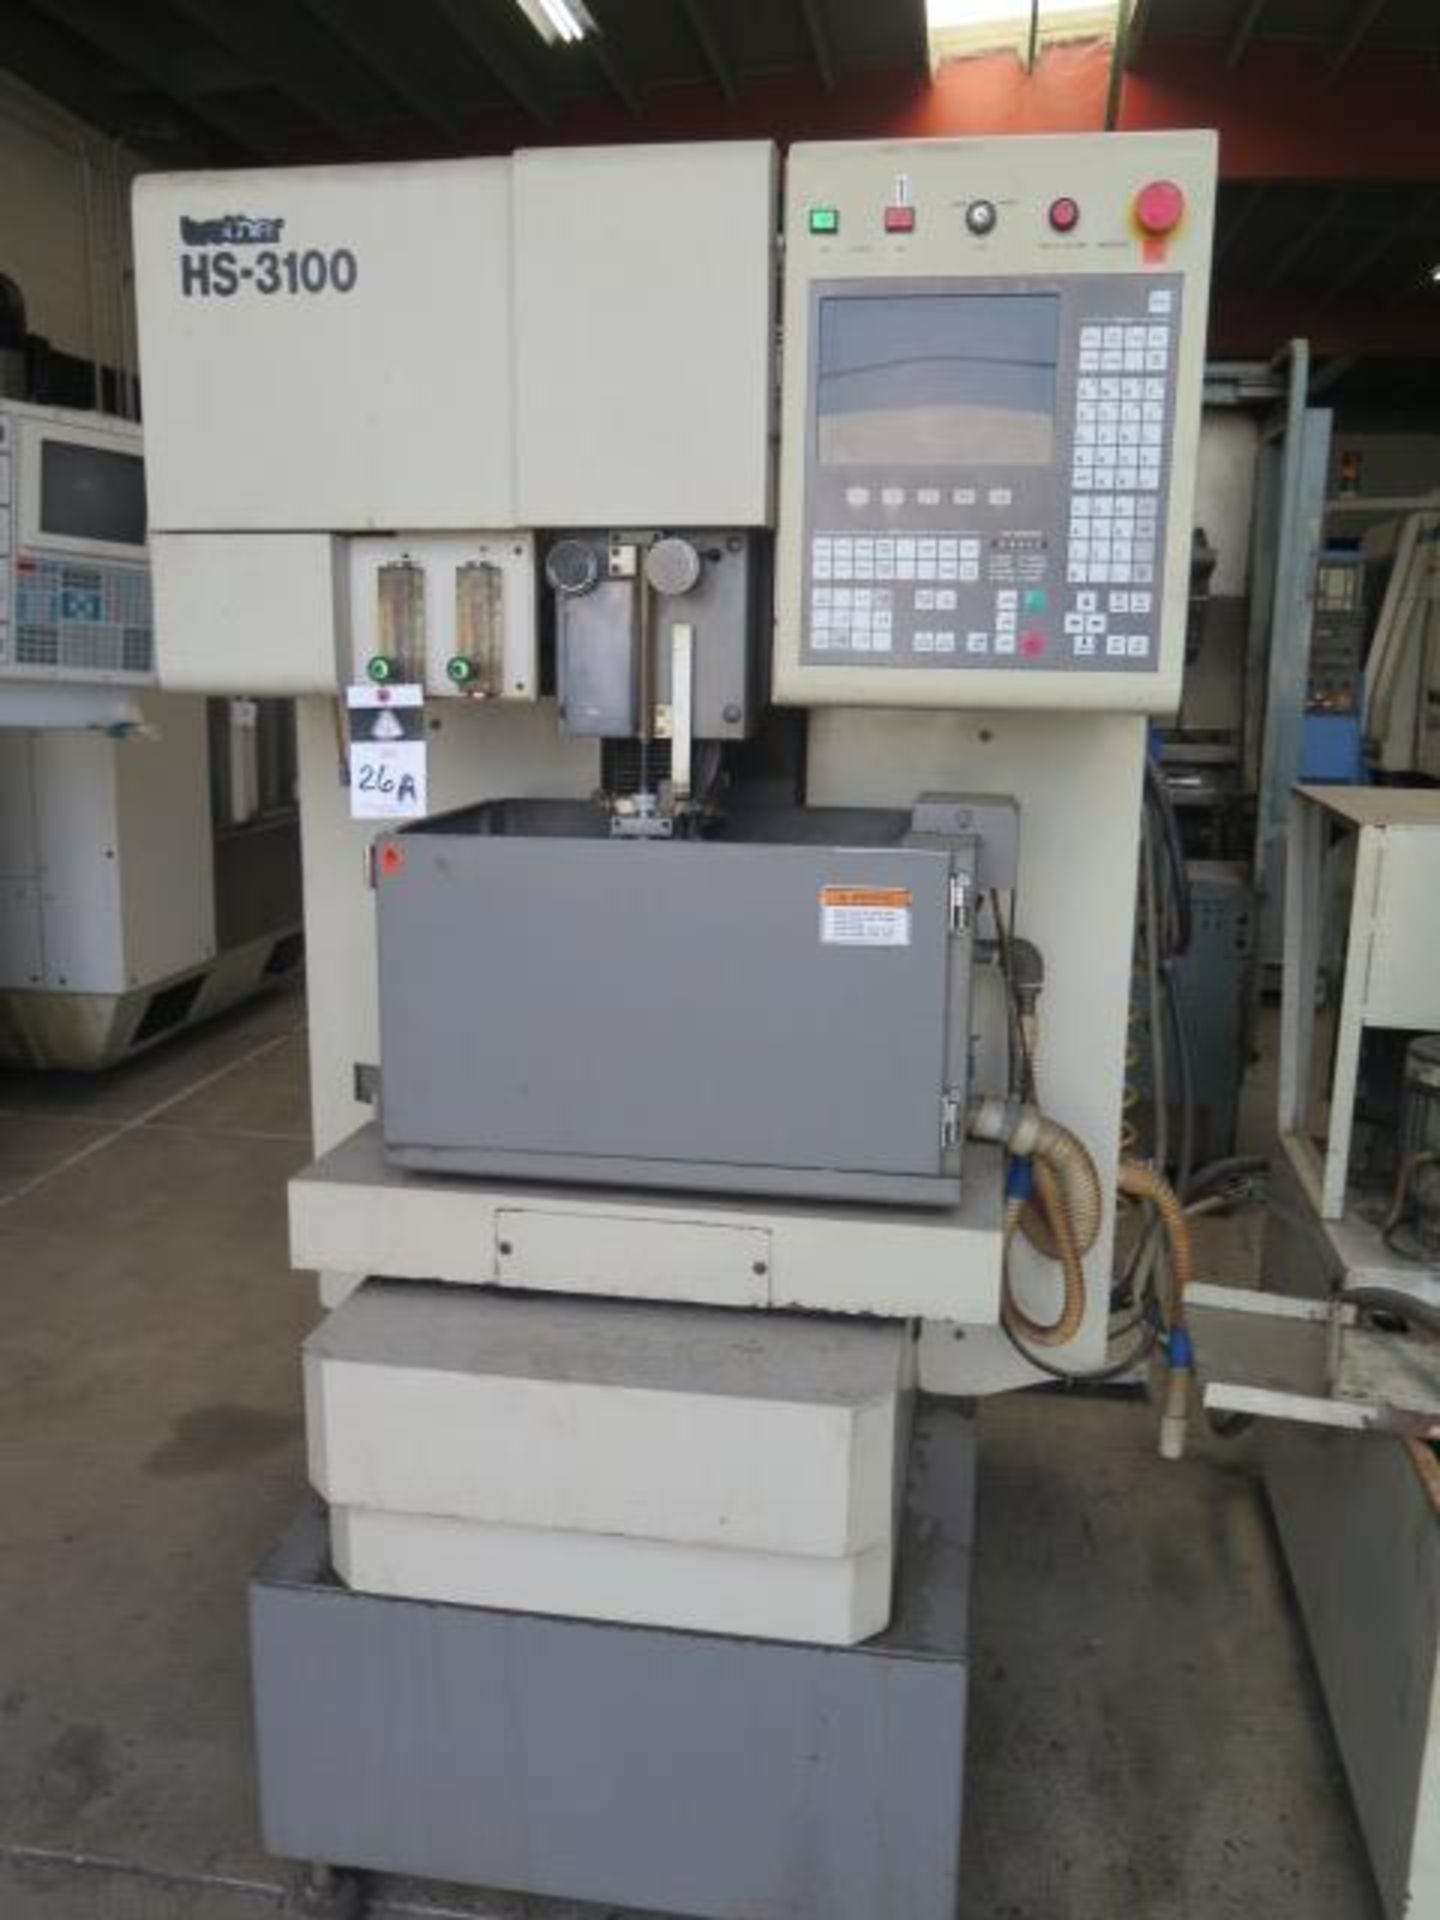 Brother HS-3100 CNC Wire EDM s/n 111120 w/ Brother CNC Controls, 8 3/4" x 11" Work Area, SOLD AS IS - Image 2 of 13